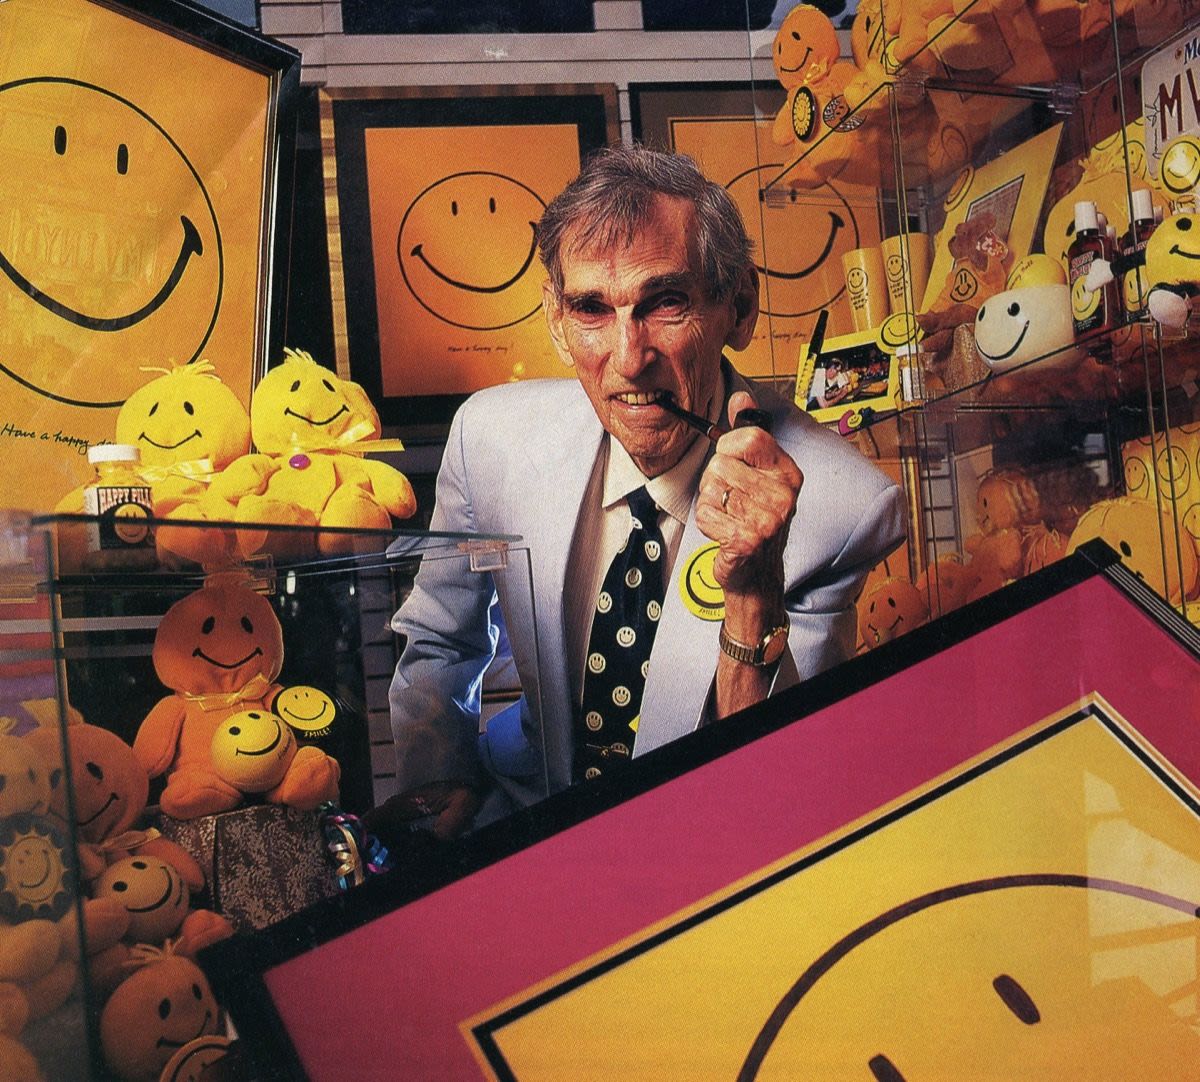 A Brief History Of The Smiley